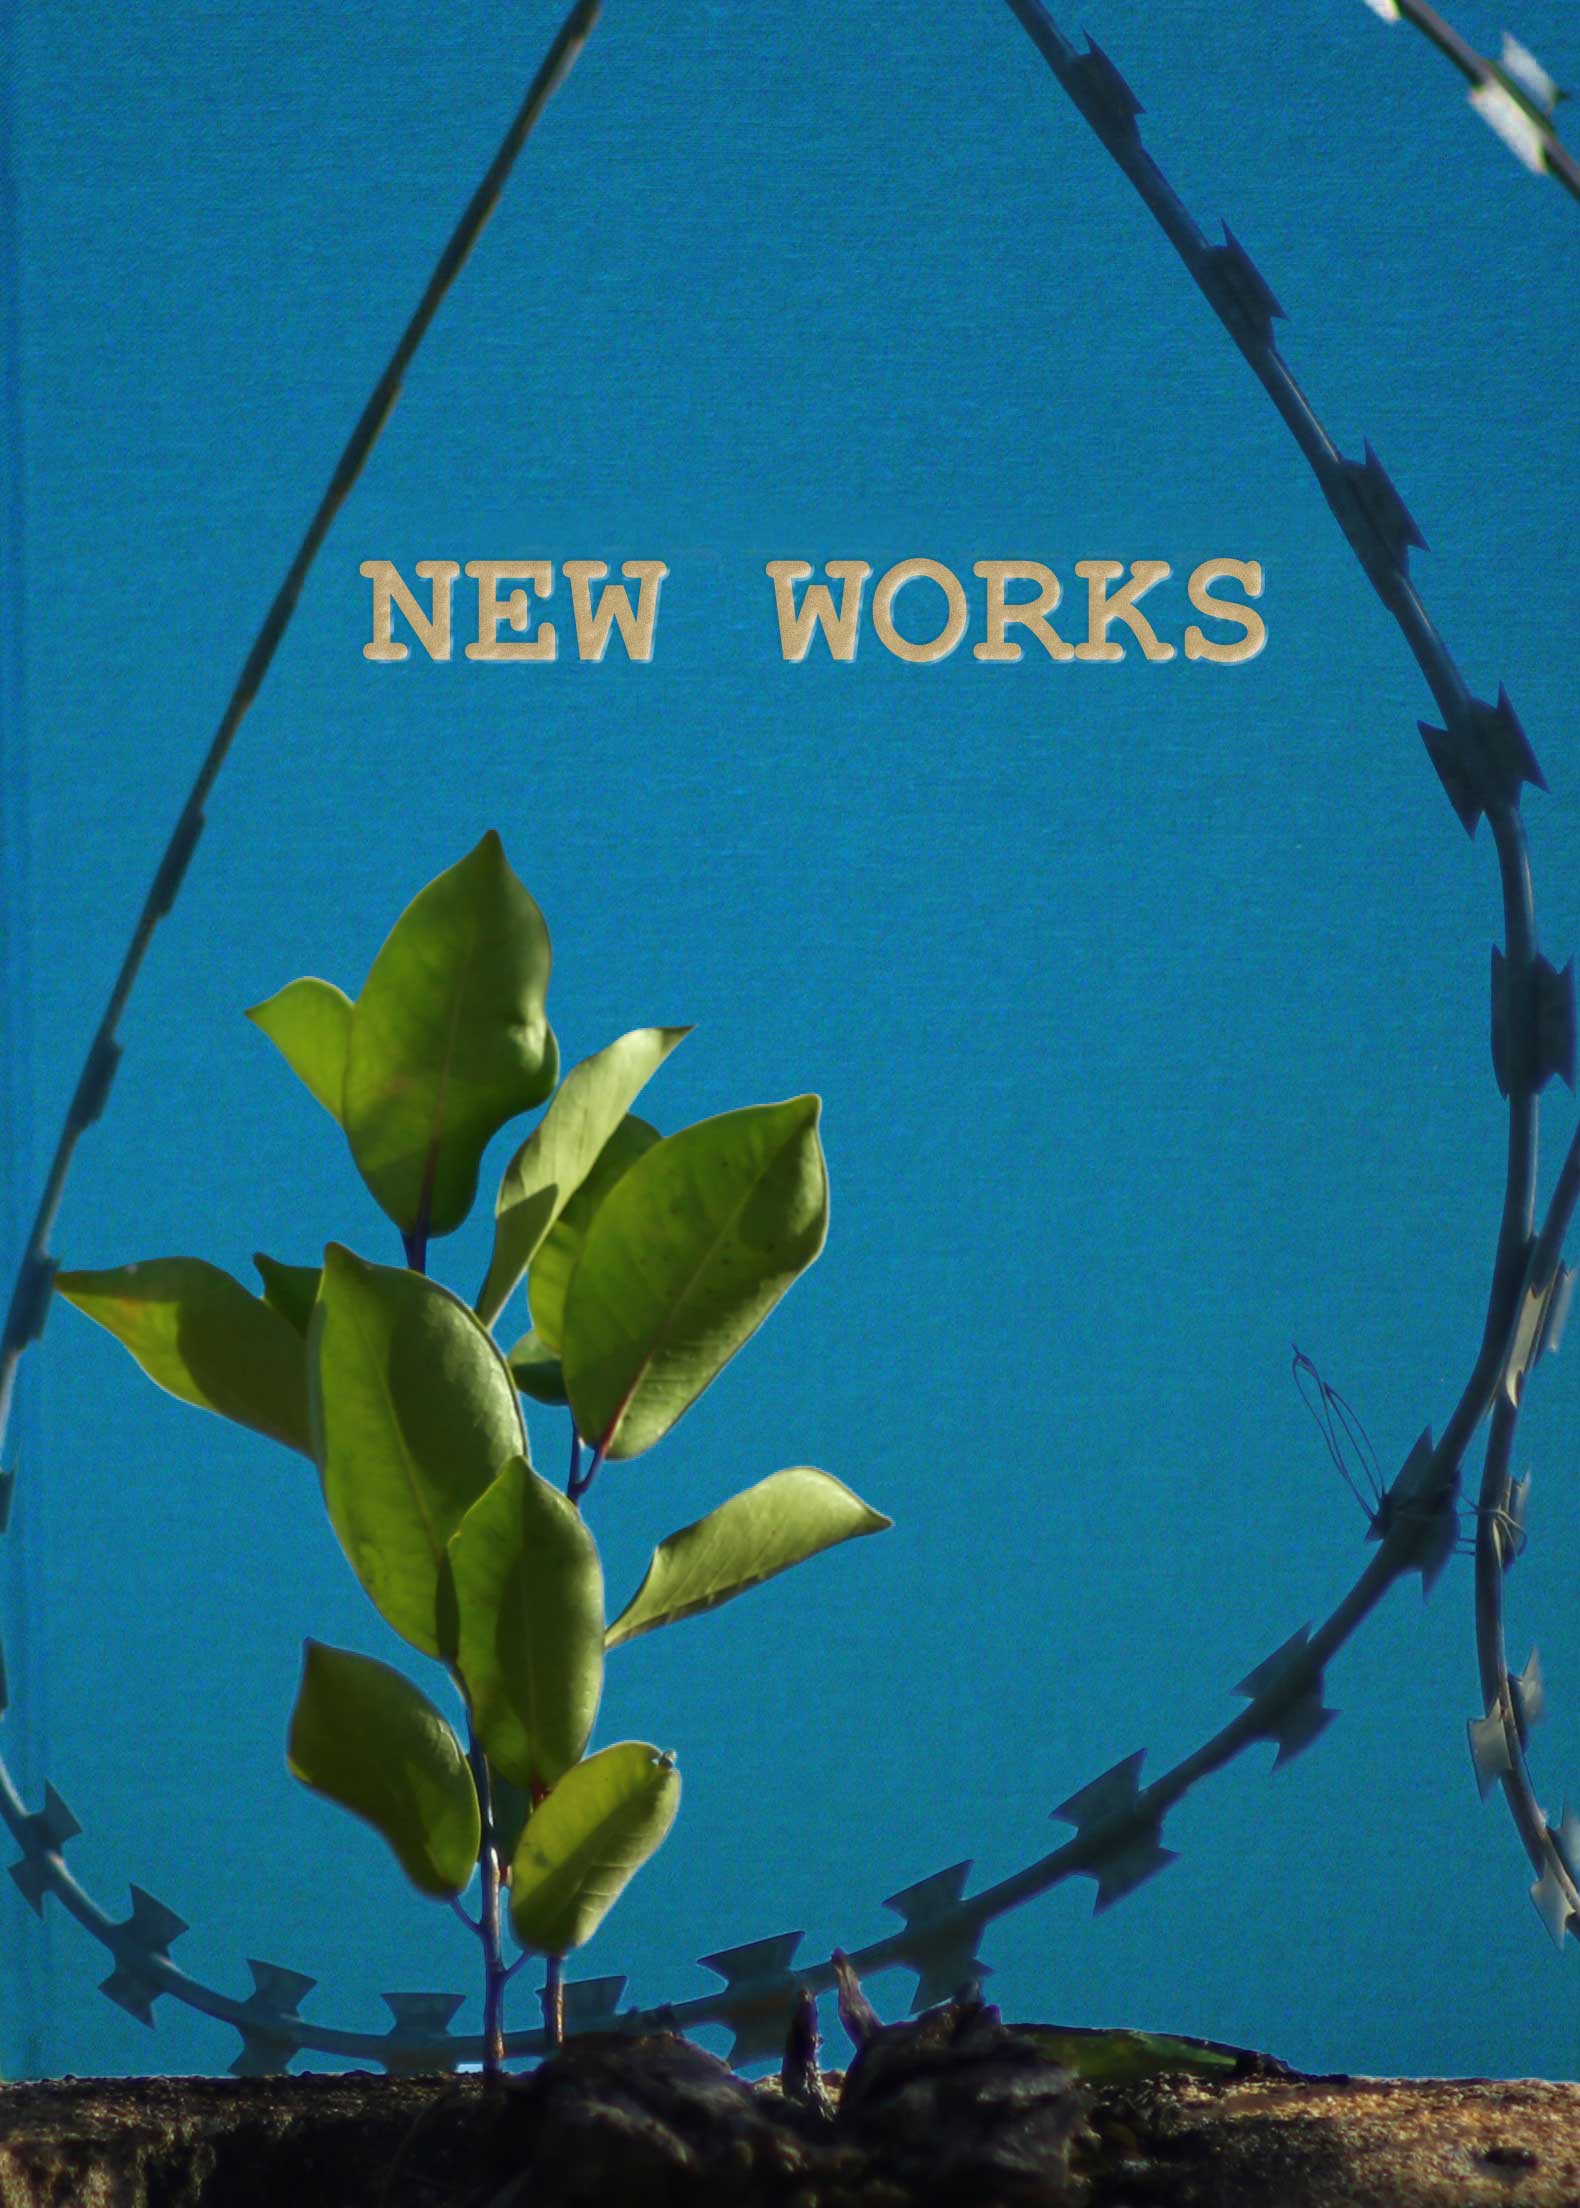 a sapling growing through barbwire in front of a book titled "New Works"